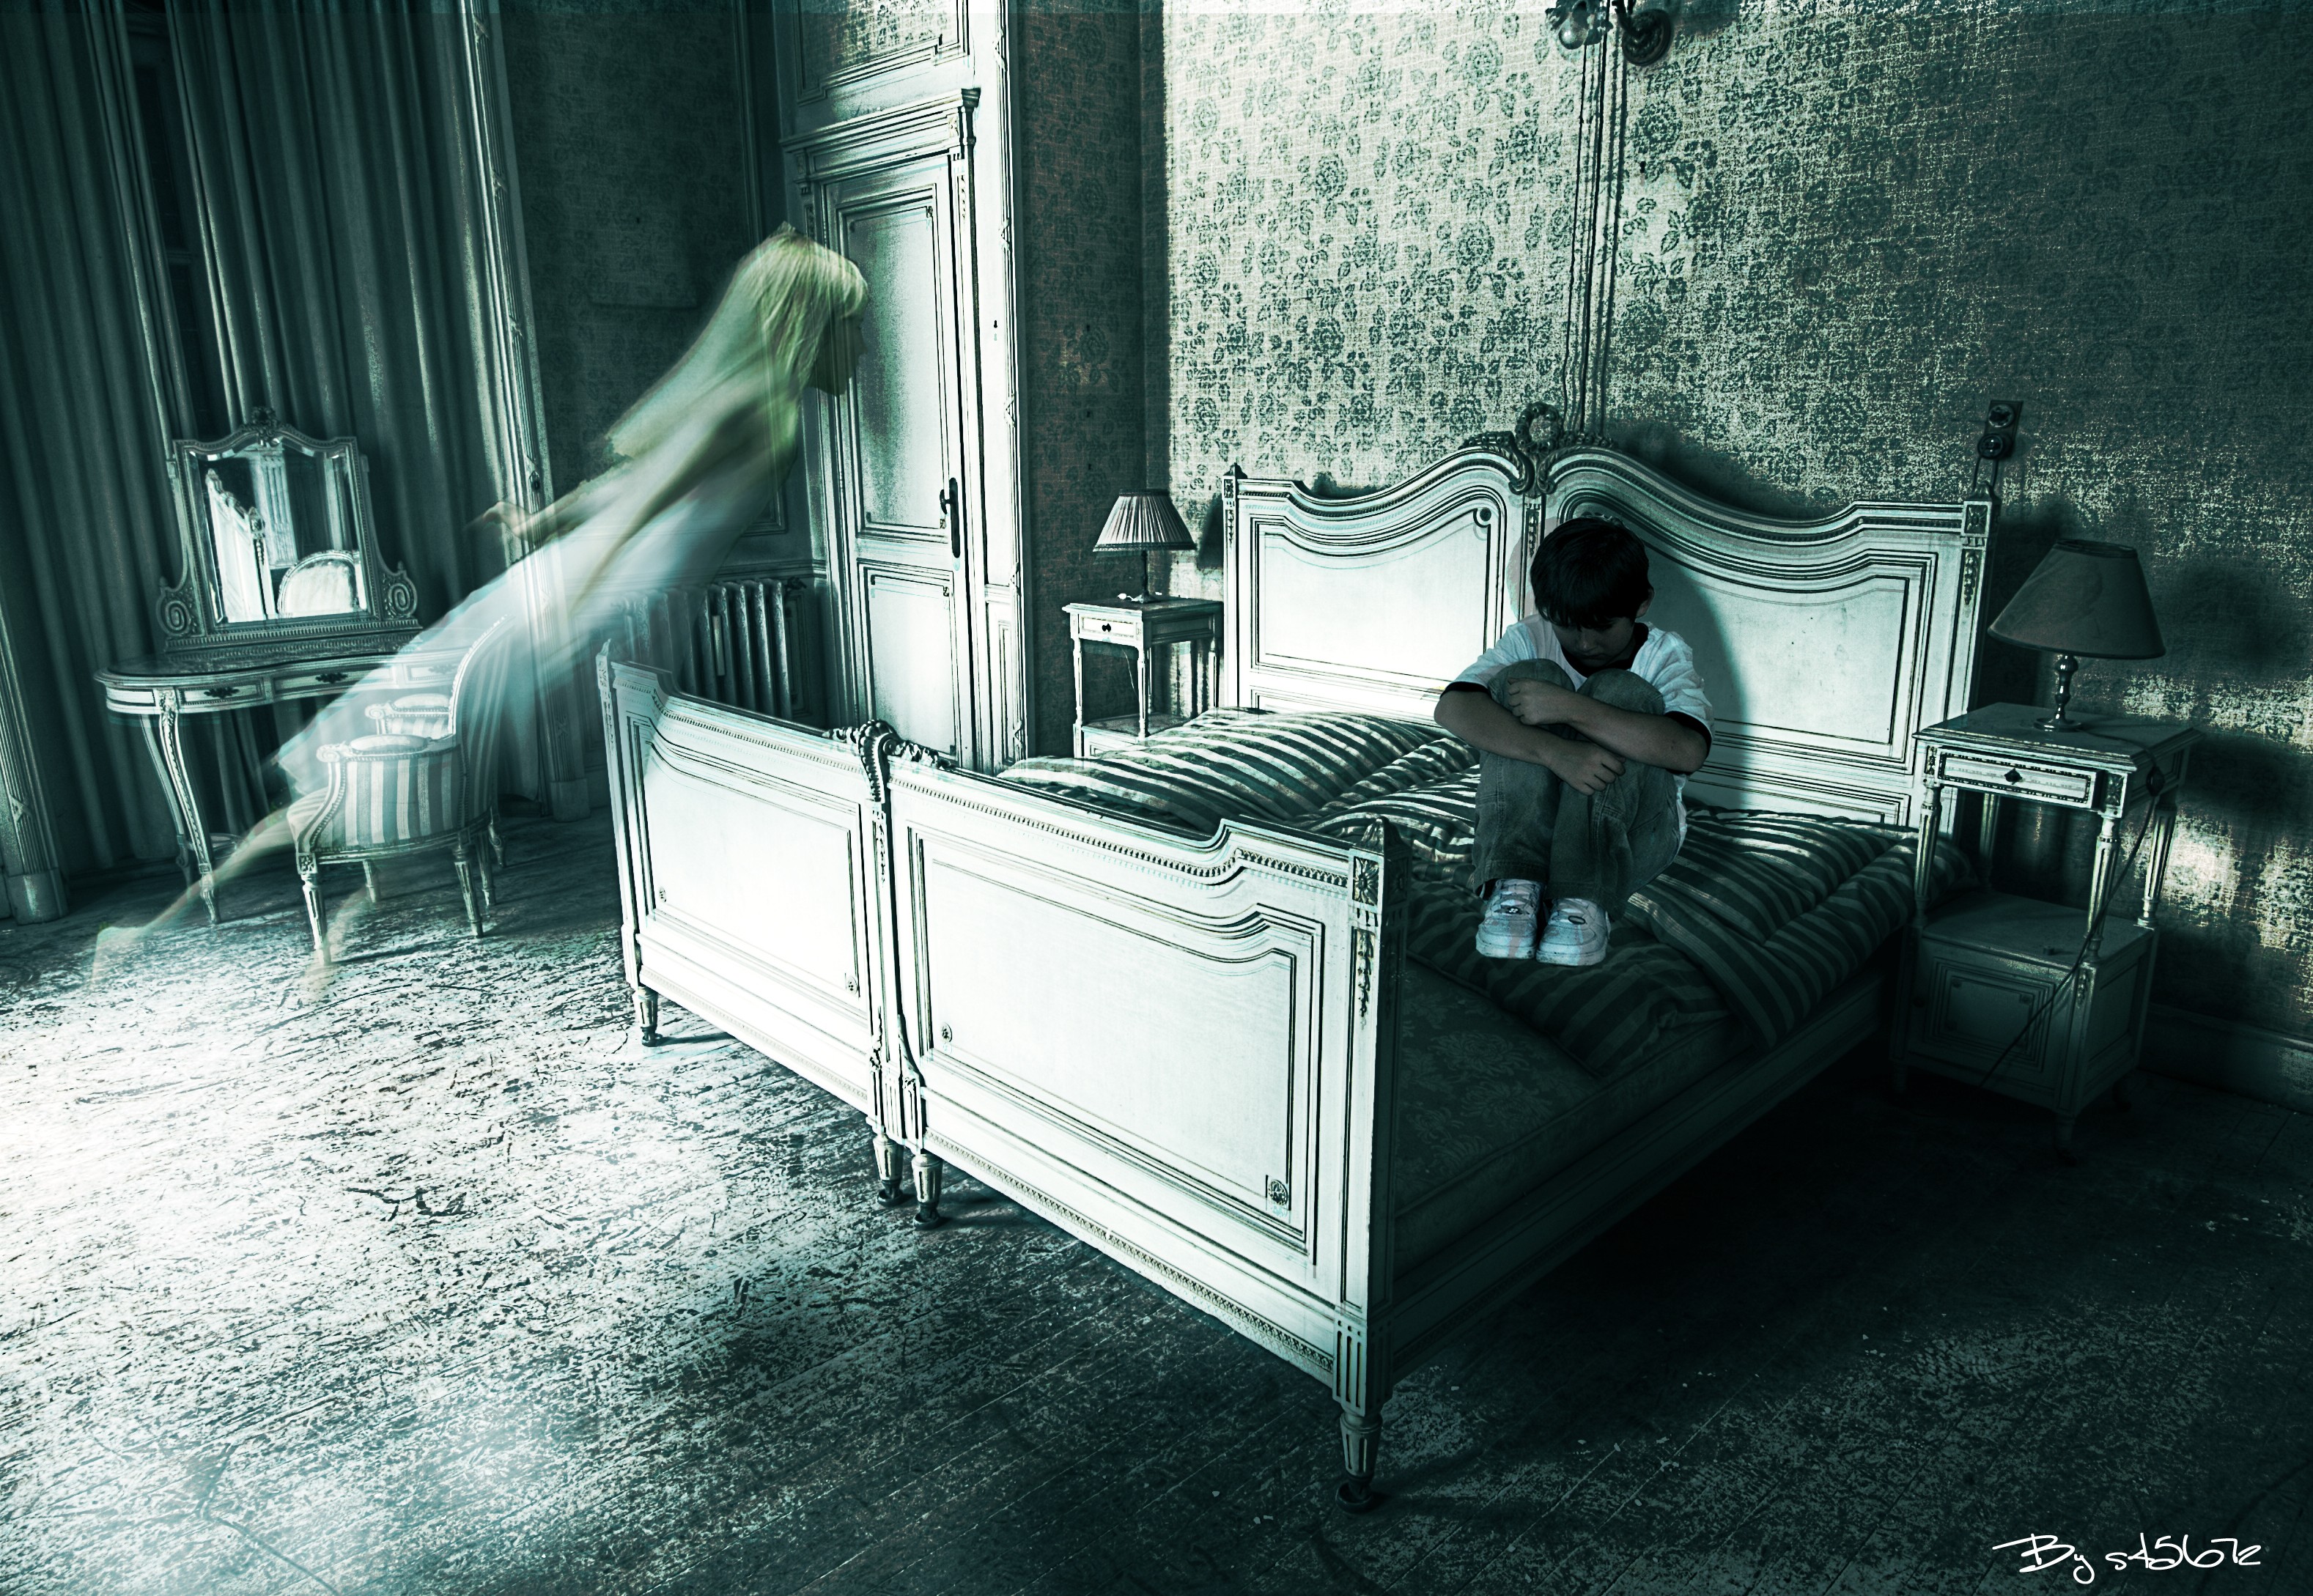 A hauntingly beautiful, dark image featuring a spectral presence.